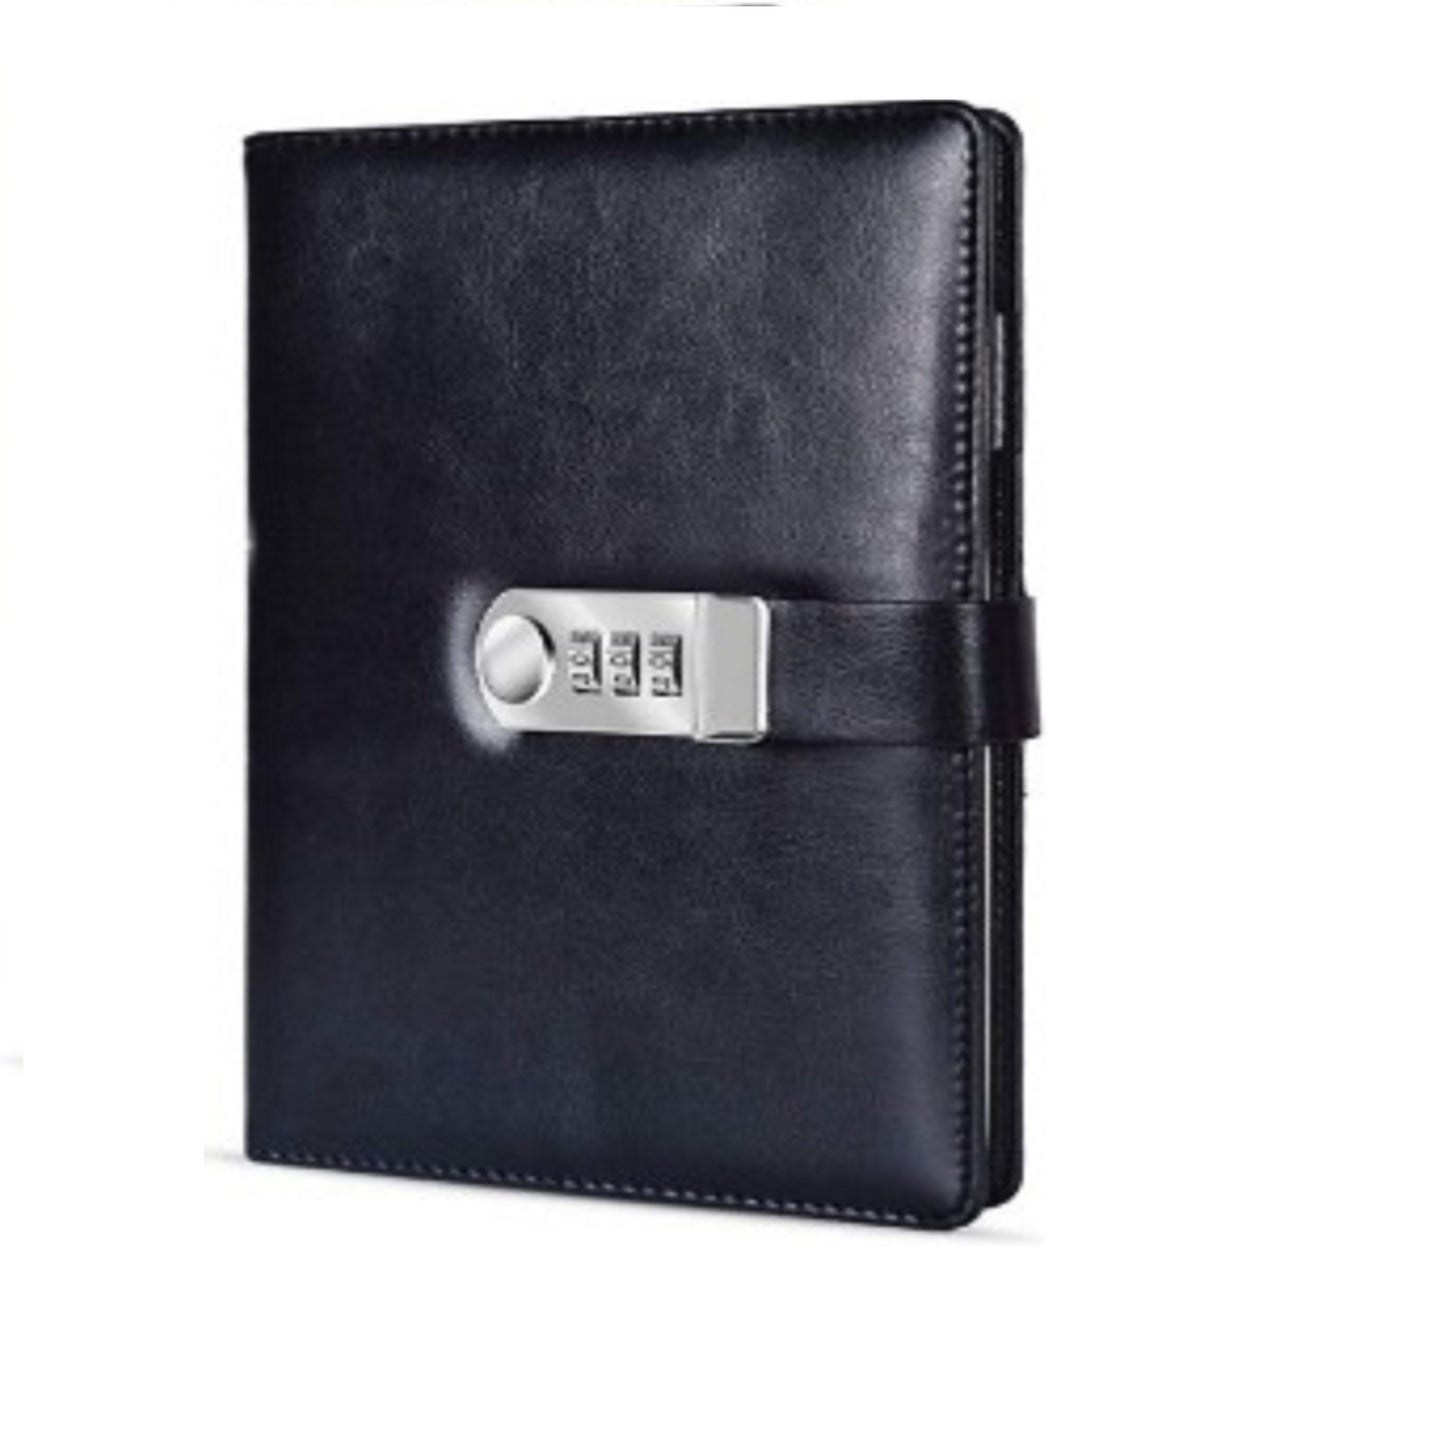 AccuPrints Black PU Leather Diary with Lock, Size 6 ny 8 inch